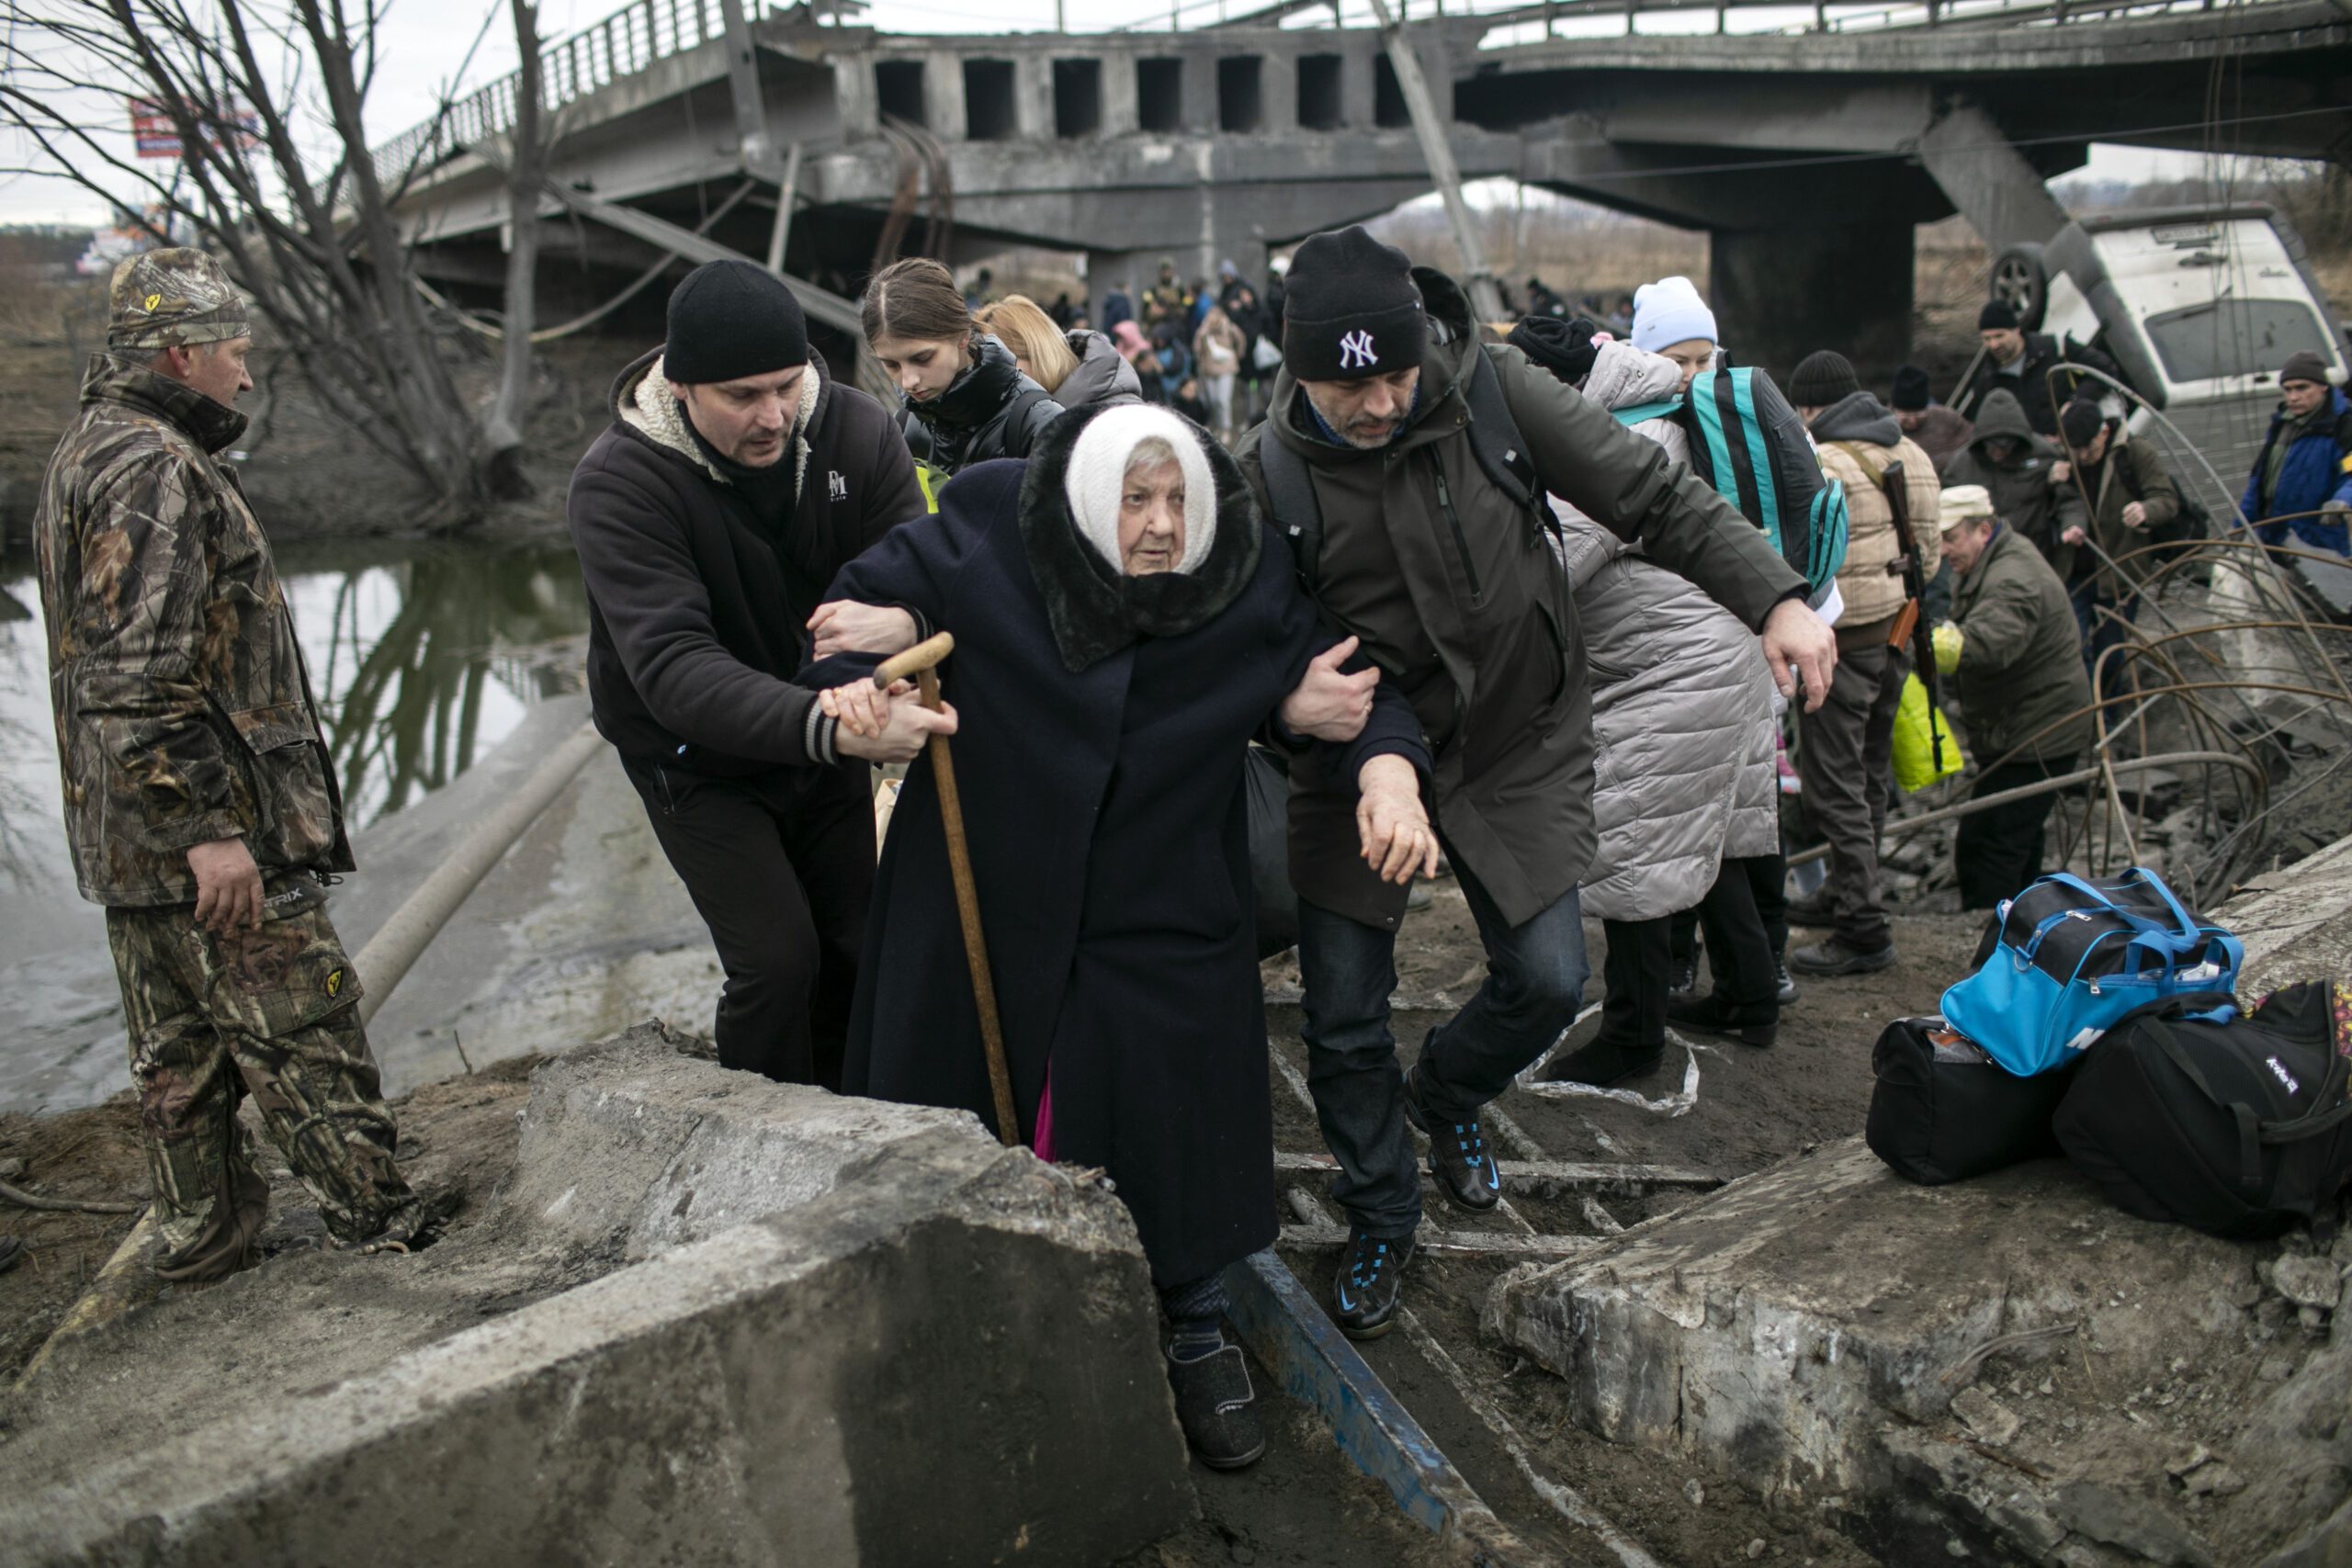 Civilians cross a destroyed bridge as they flee the city of Irpin, Kiev, Ukraine, during heavy bombardment by the Russian Army, March 5, 2022. (Photo Credit: AG)Image may be used in any HIAS materials, print and digital, until March 8, 2023. After this date, additional usage must be re-negotiated directly with photographer. No affiliate rights granted.